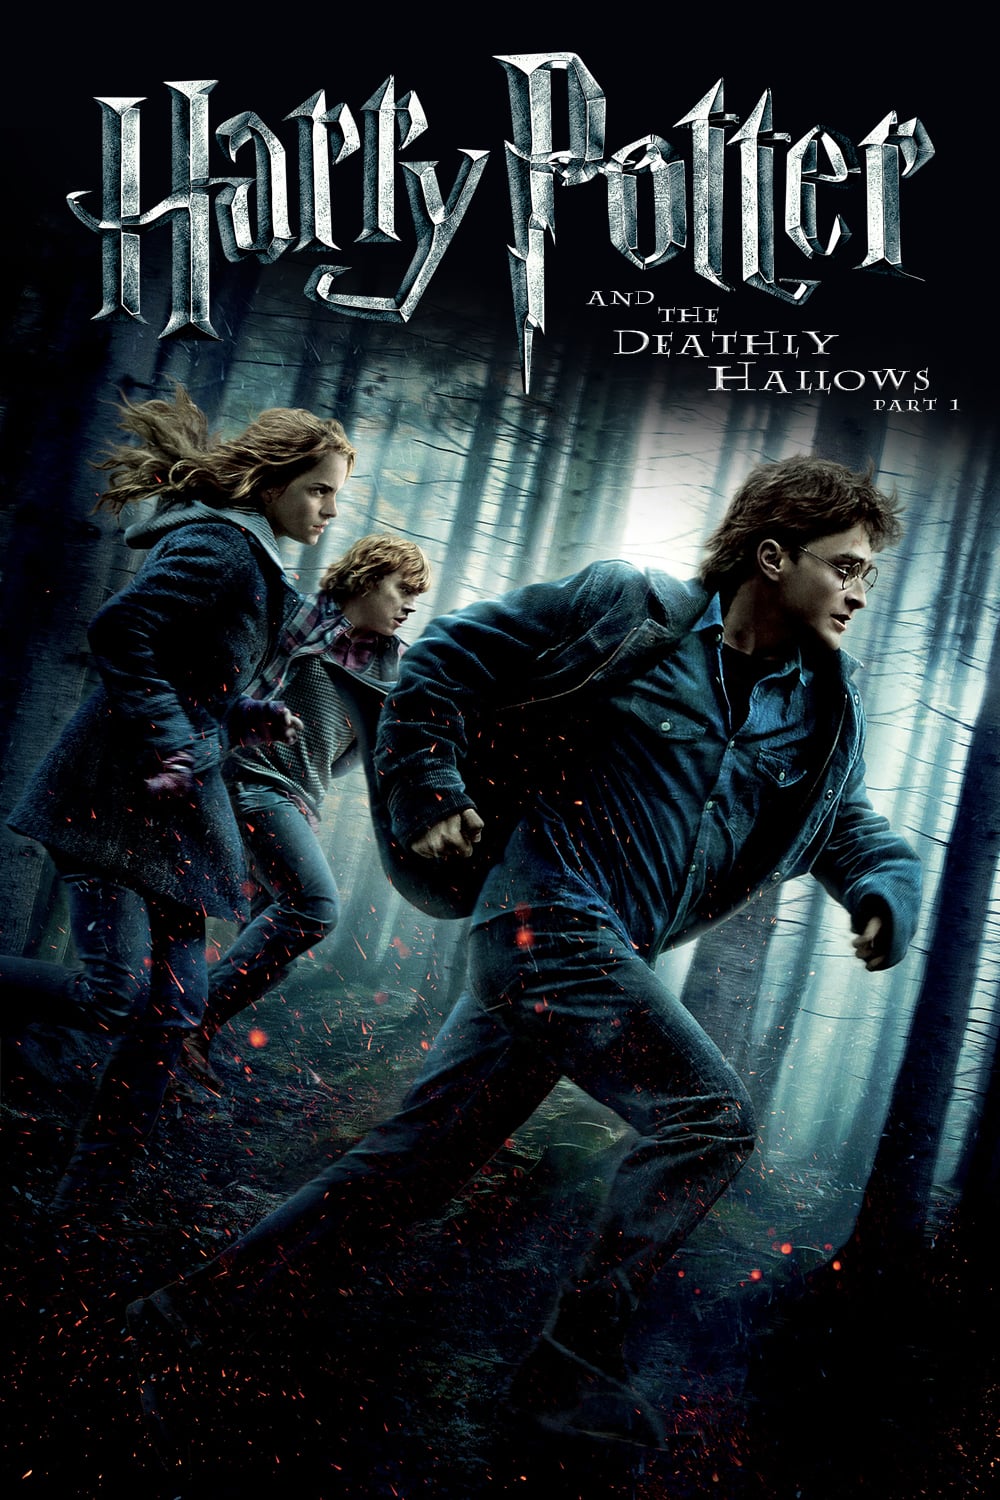 Poster for the movie "Harry Potter and the Deathly Hallows: Part 1"